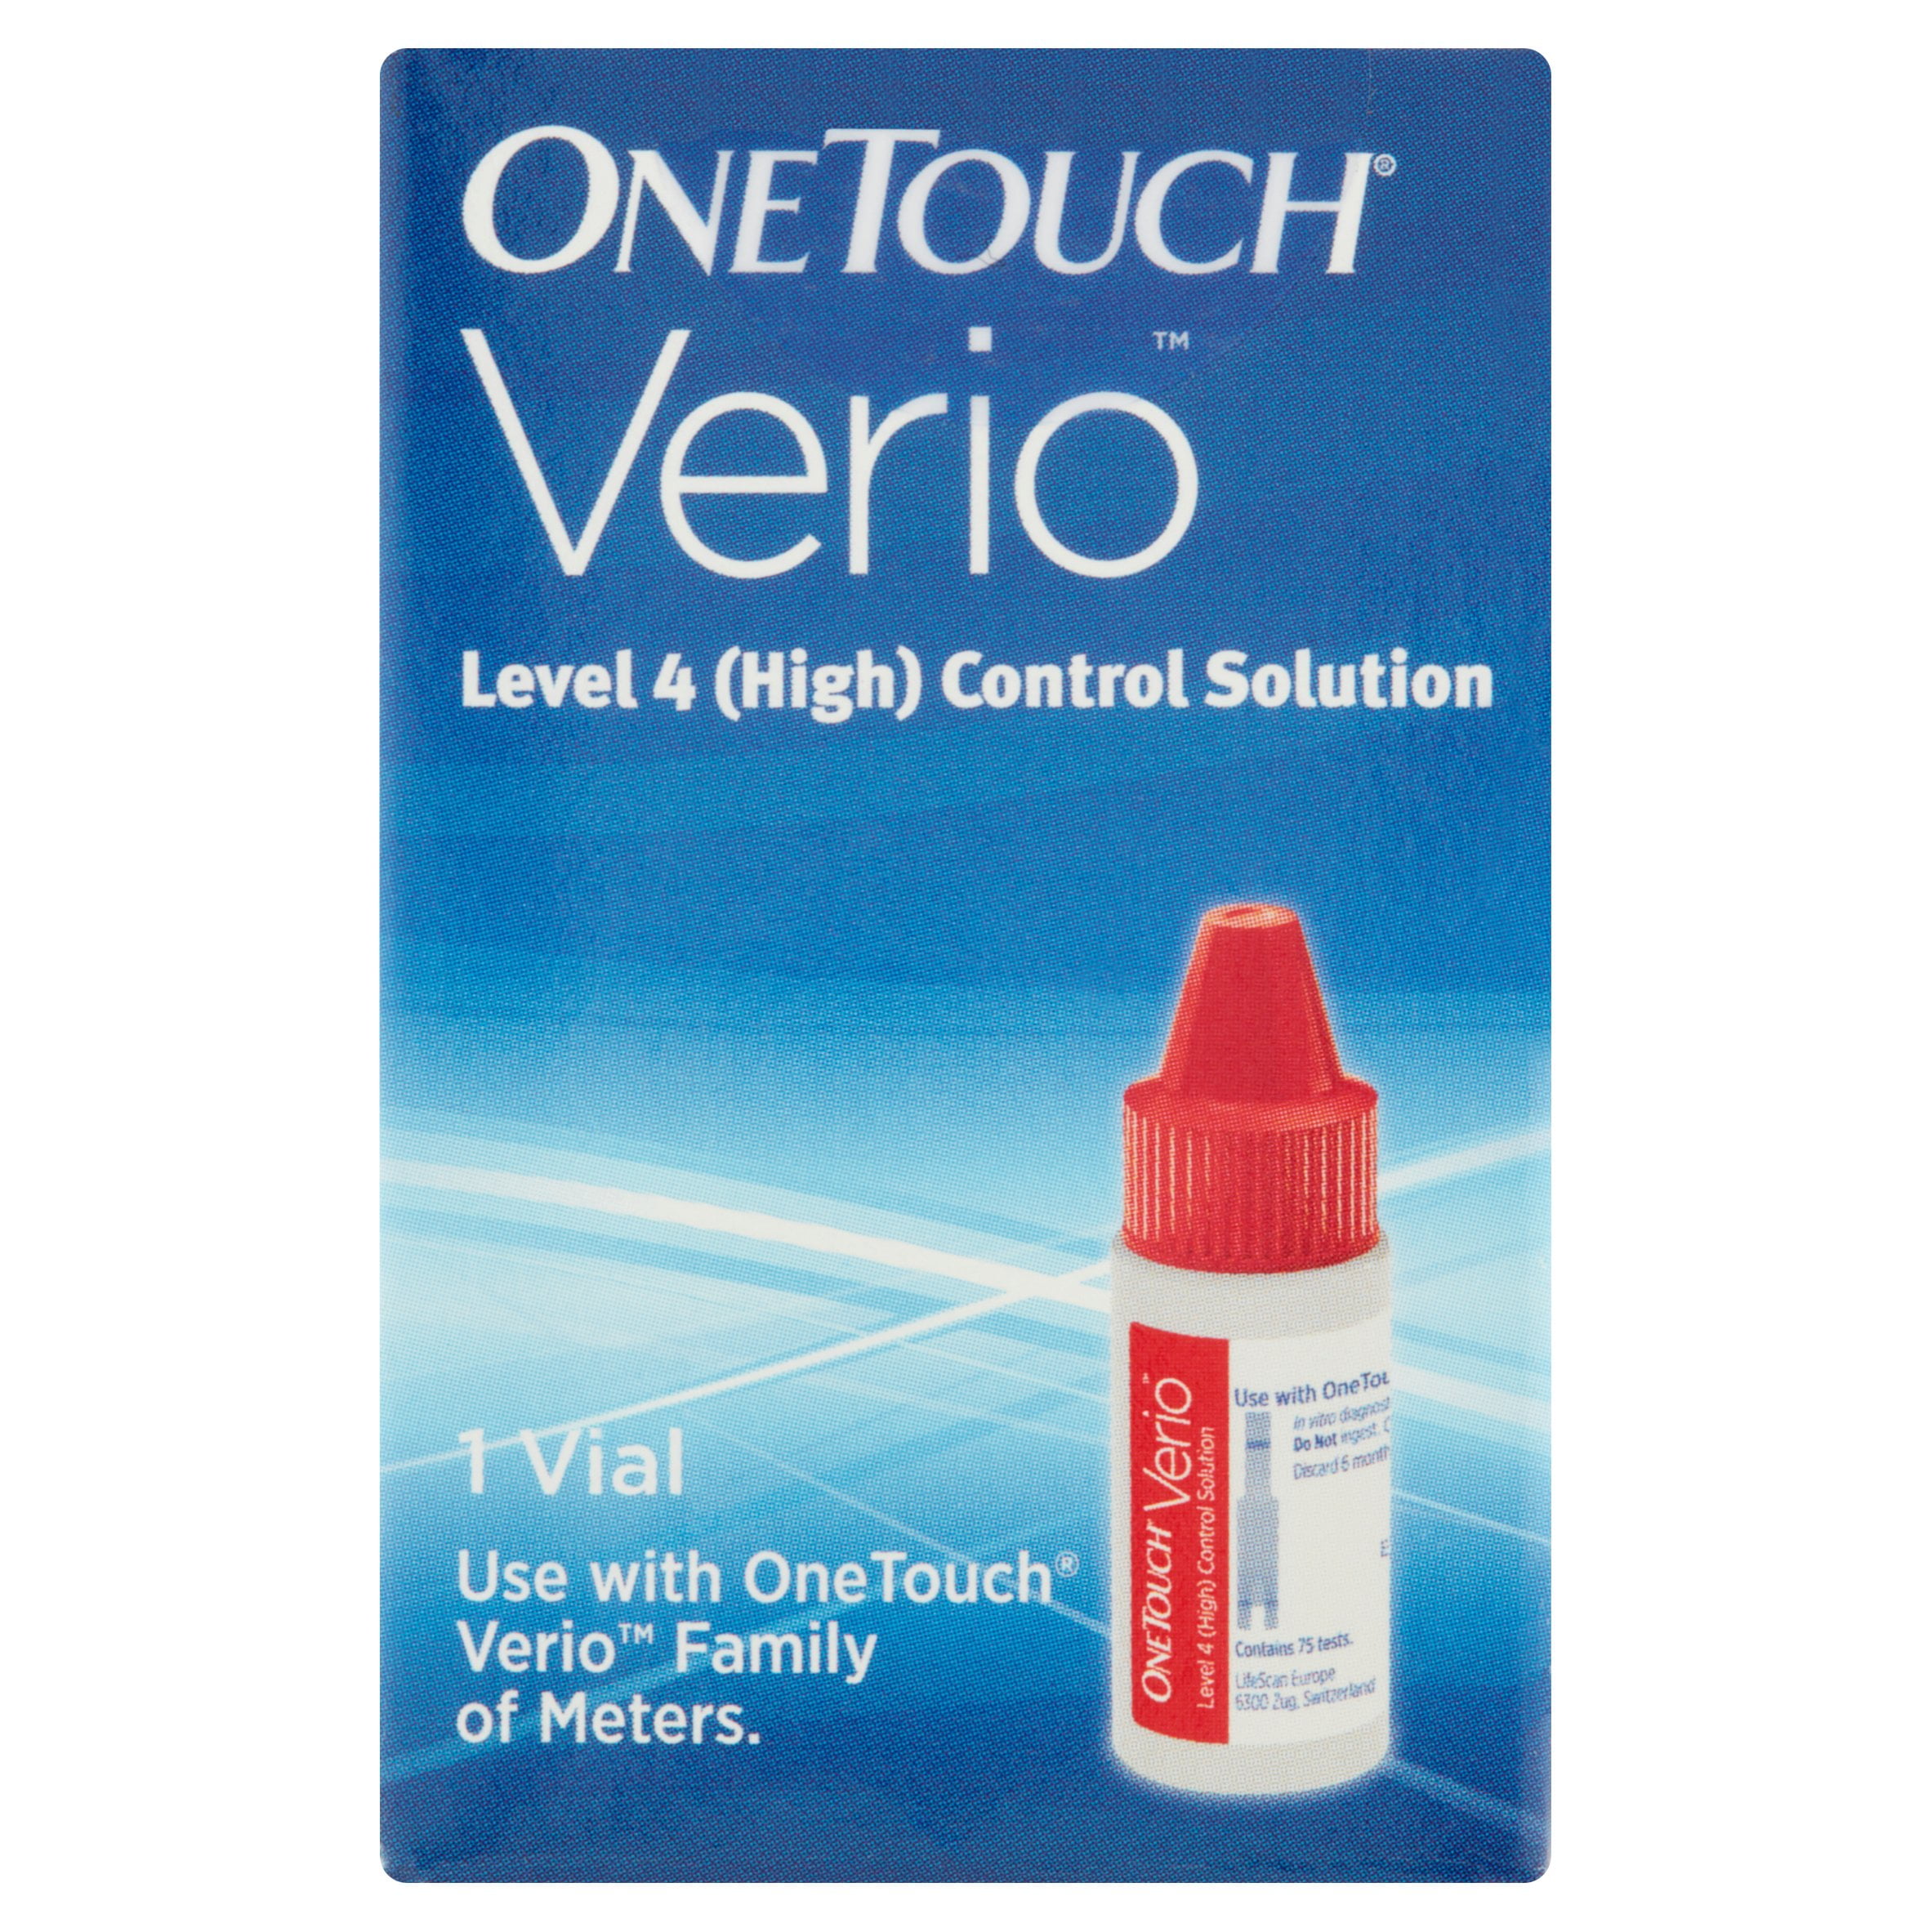 ONETOUCH Verio раствор. Контрольный раствор ONETOUCH Verio. One Touch Verio раствор купить. Контрольный раствор дляглбкометра one Touch Verio Брянск. Control solution